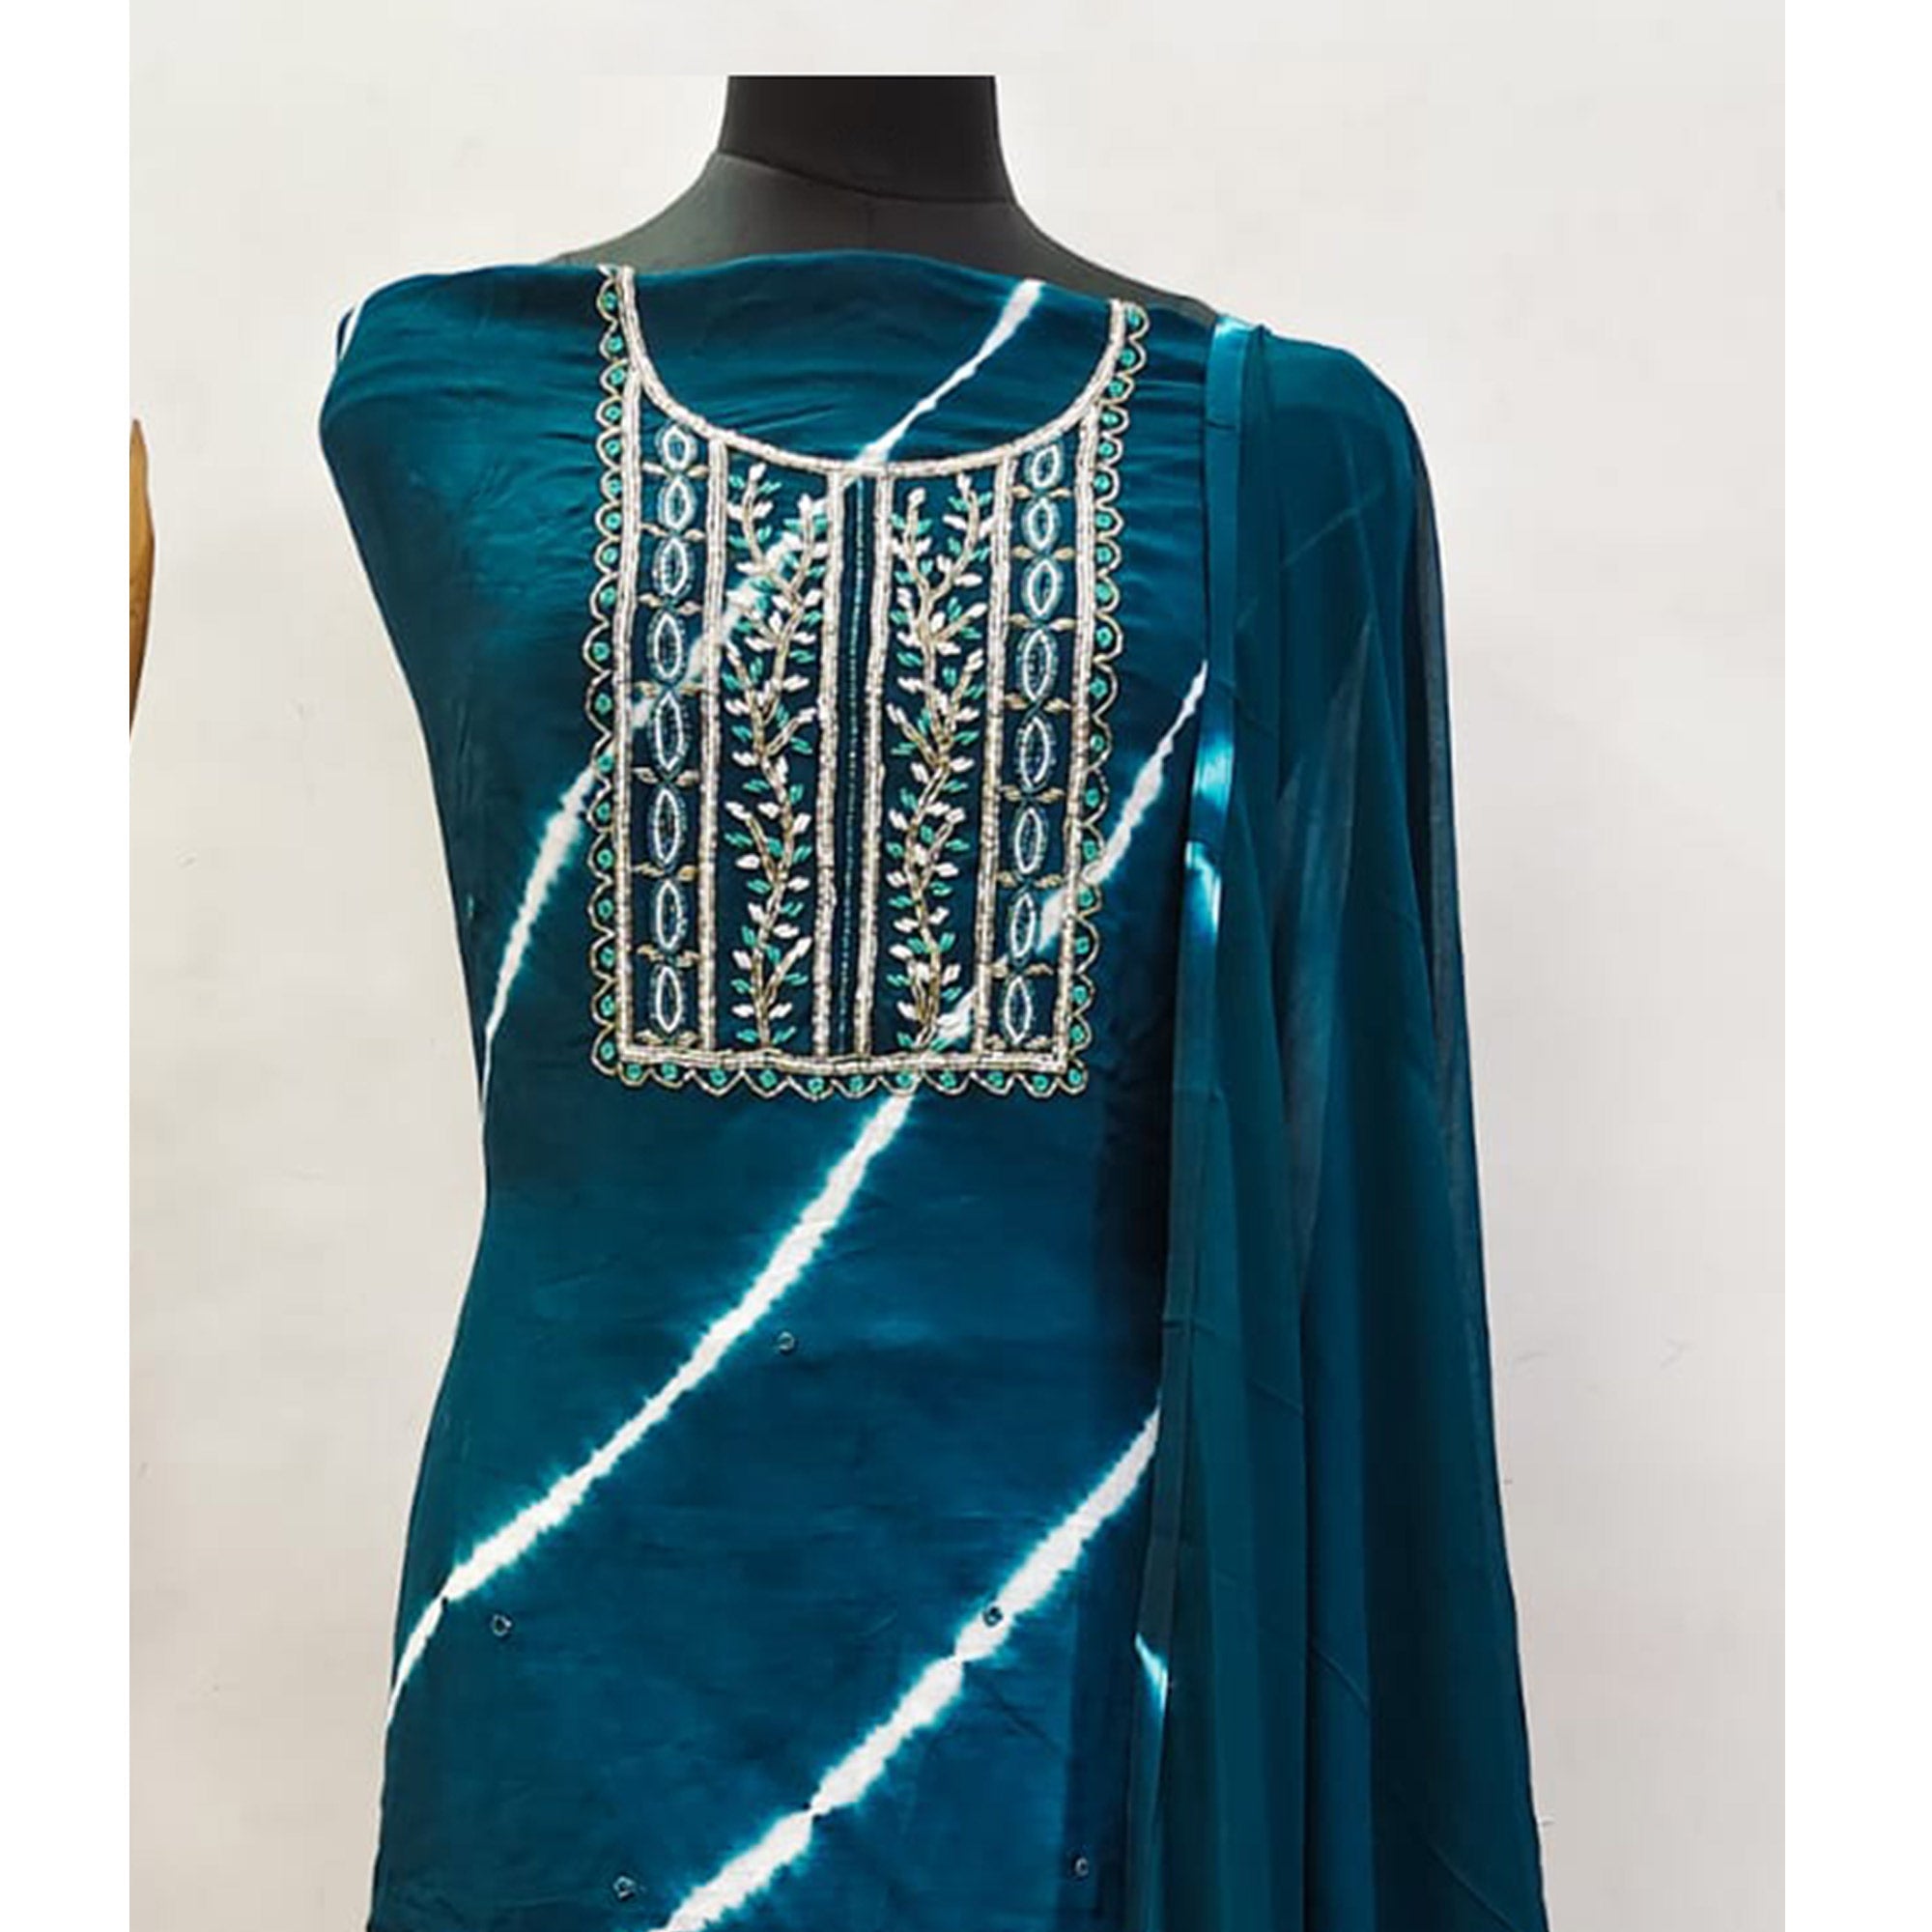 Morpich Handwork Embroidery With Leheriya Printed Viscose Dress Material